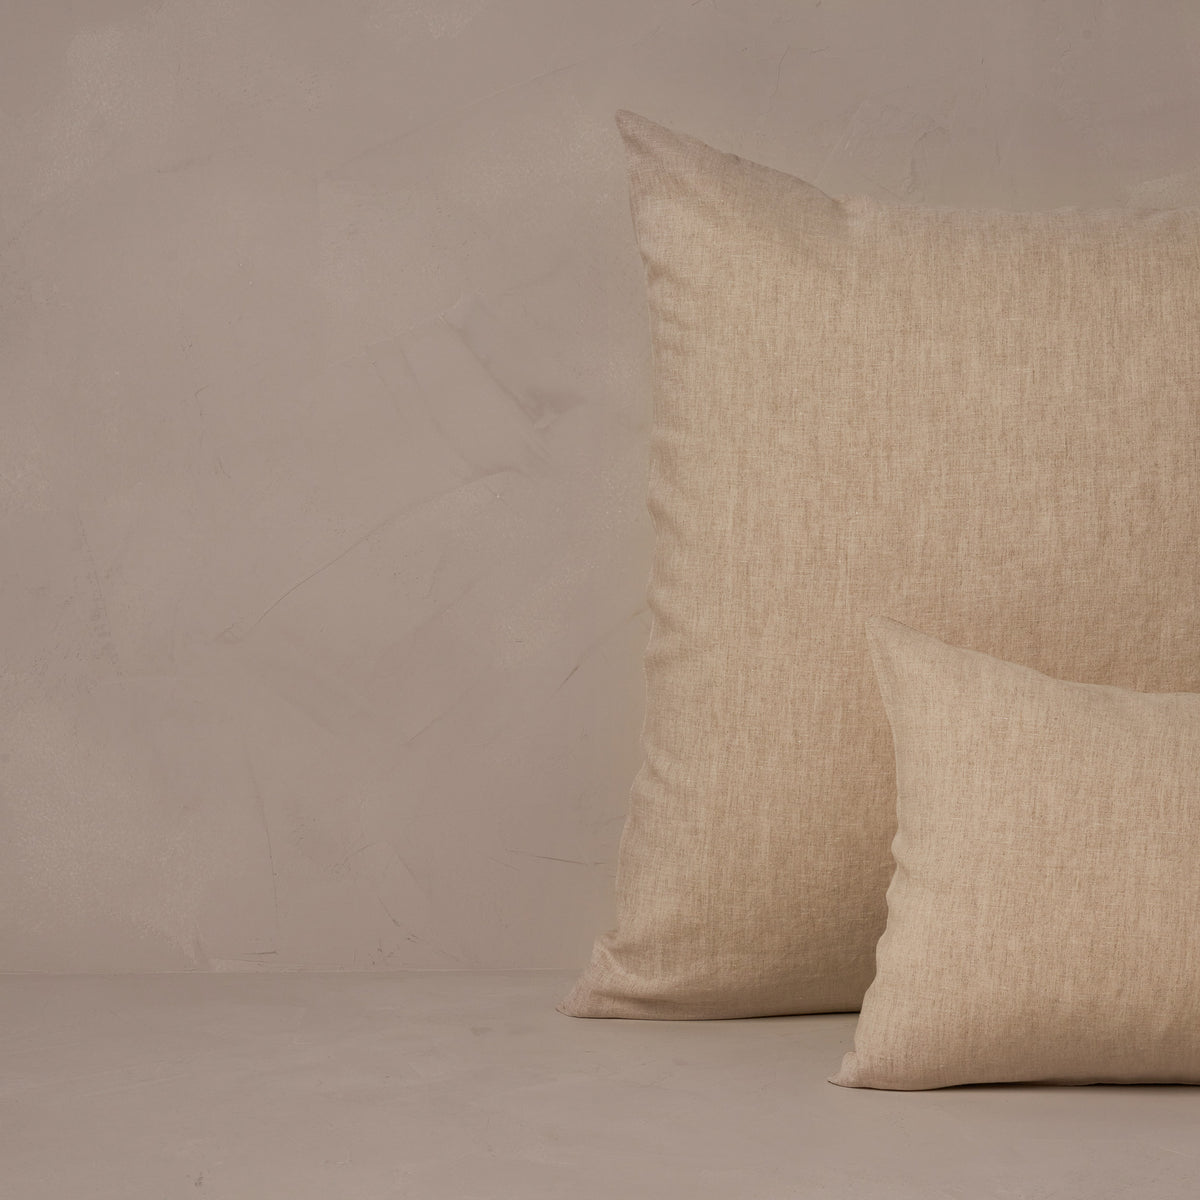 An image of a small boudoir or travel size pillow stacked in front of a large euro size pillow. The pillow cases are made in Italy of breathable and relaxed 100% linen, LETTO Classic Linen in color natural. data-image-id=